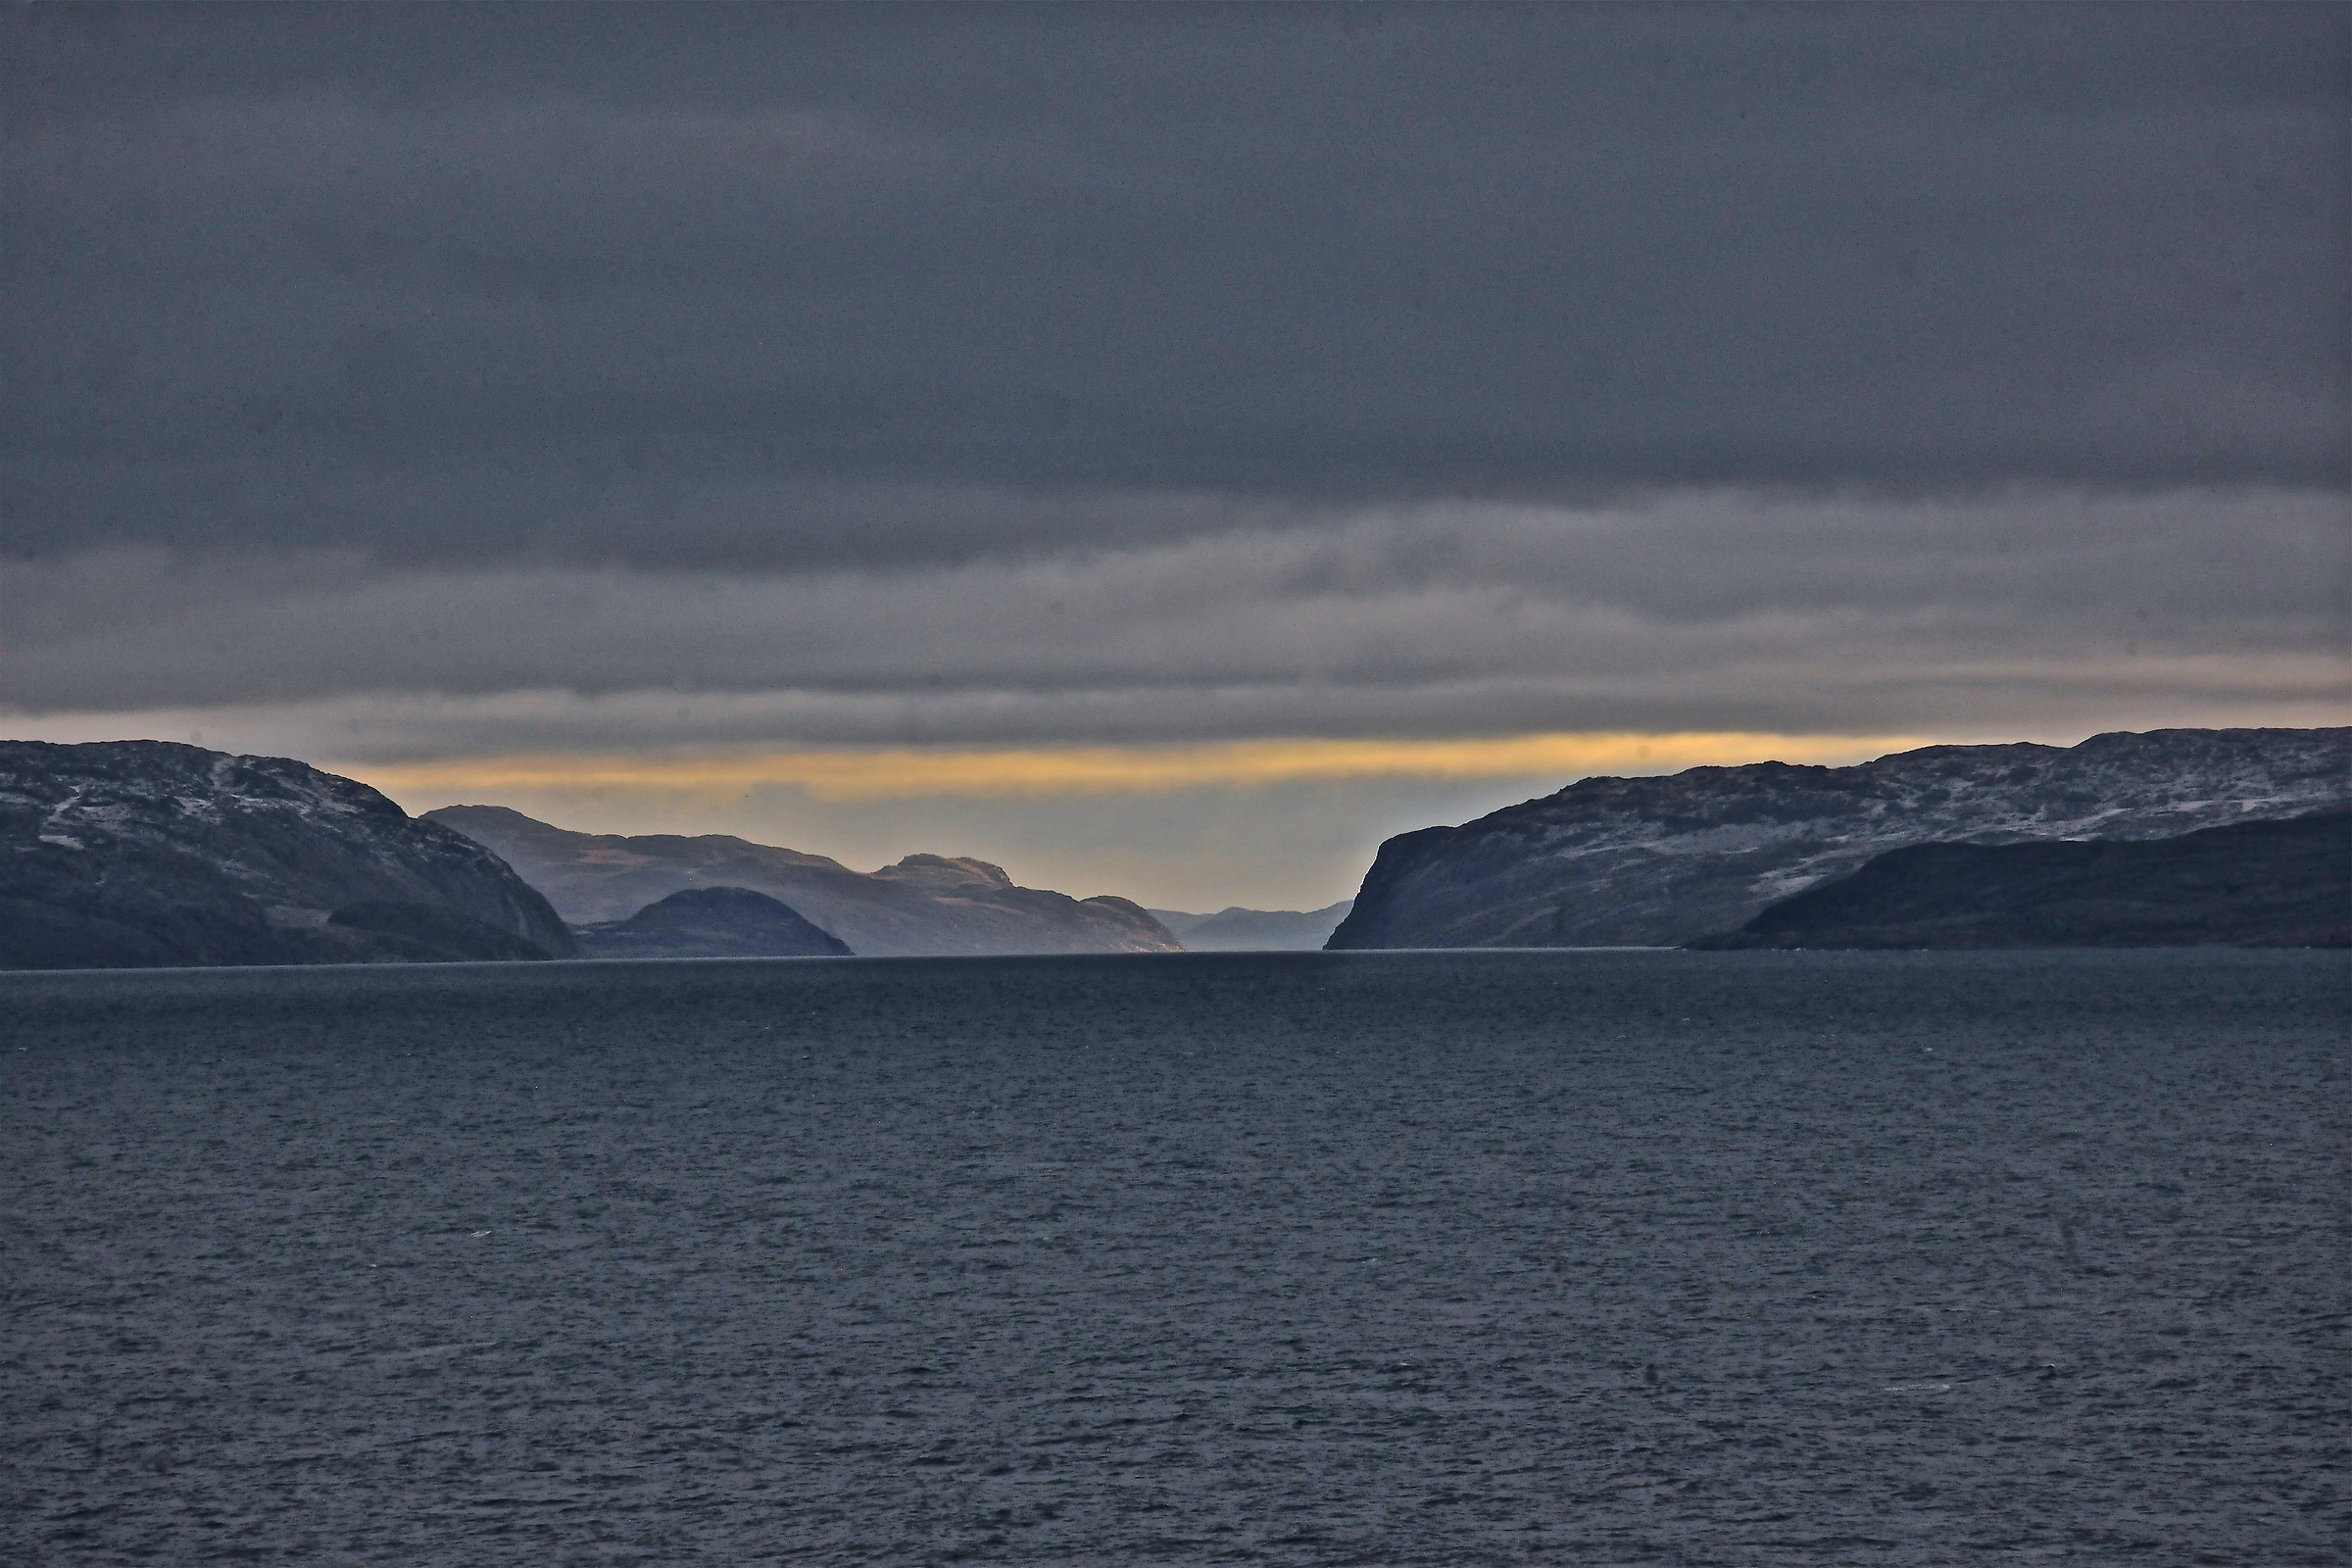 Sunrise over the Strait of bellot, between America and island...